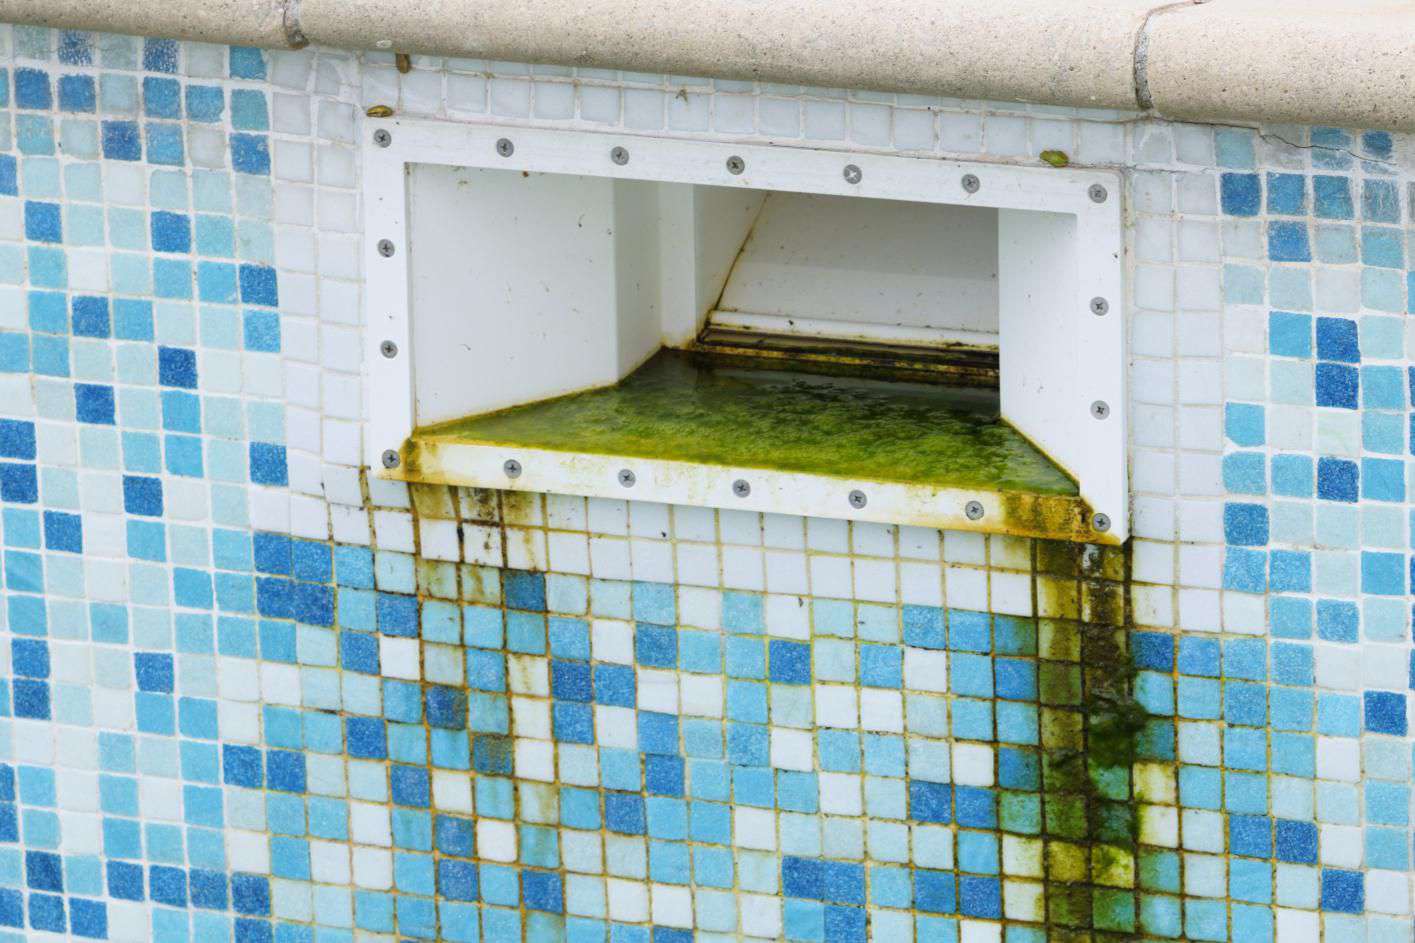 Algues vertes Grunge before Cleaning Tiled Swimming Pool